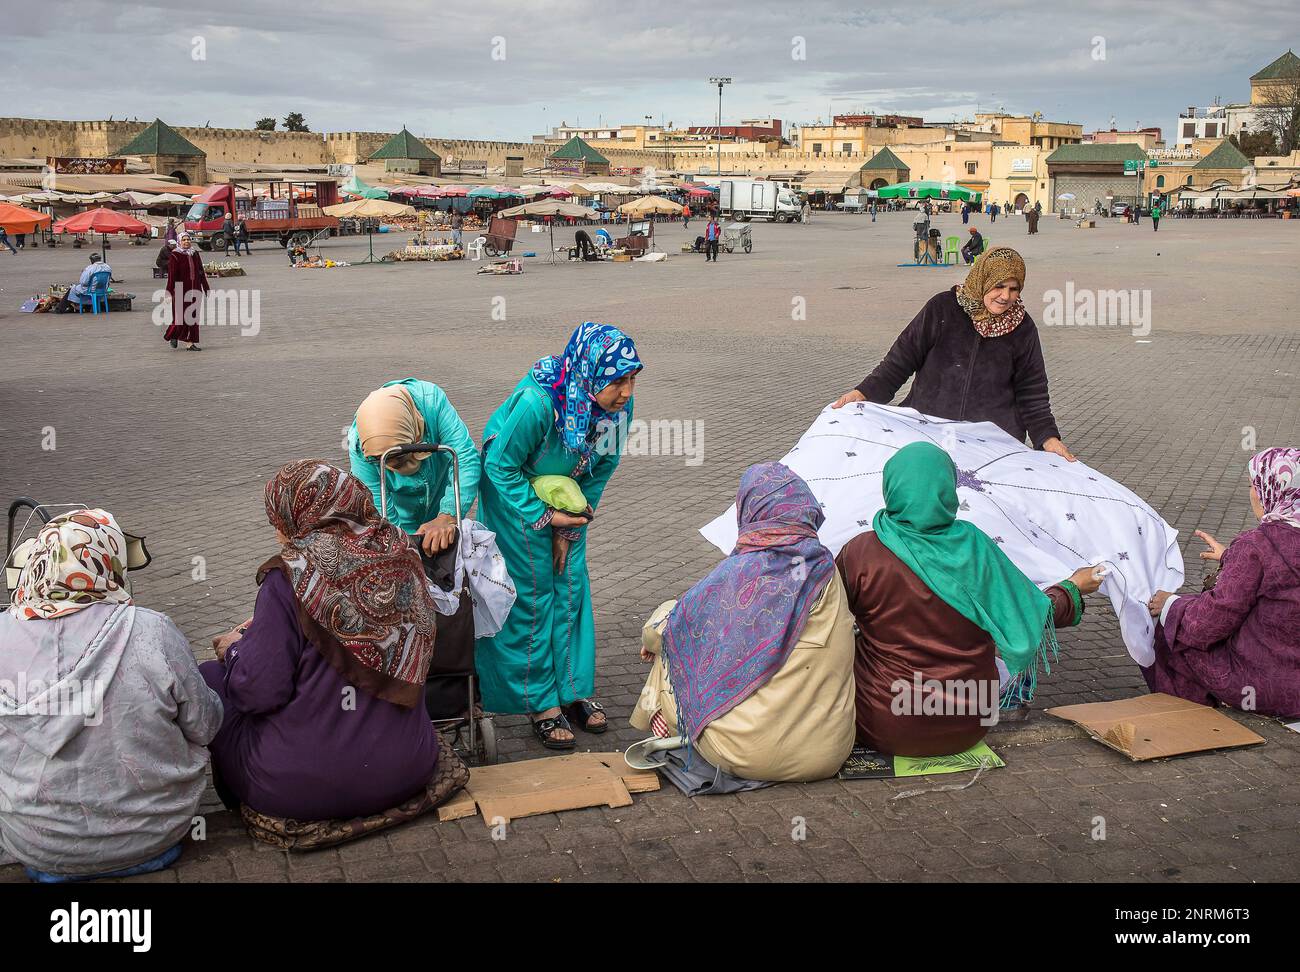 Women and woman selling handmade tablecloth with traditional motifs. In El Hedim Square, Meknes, Morocco Stock Photo